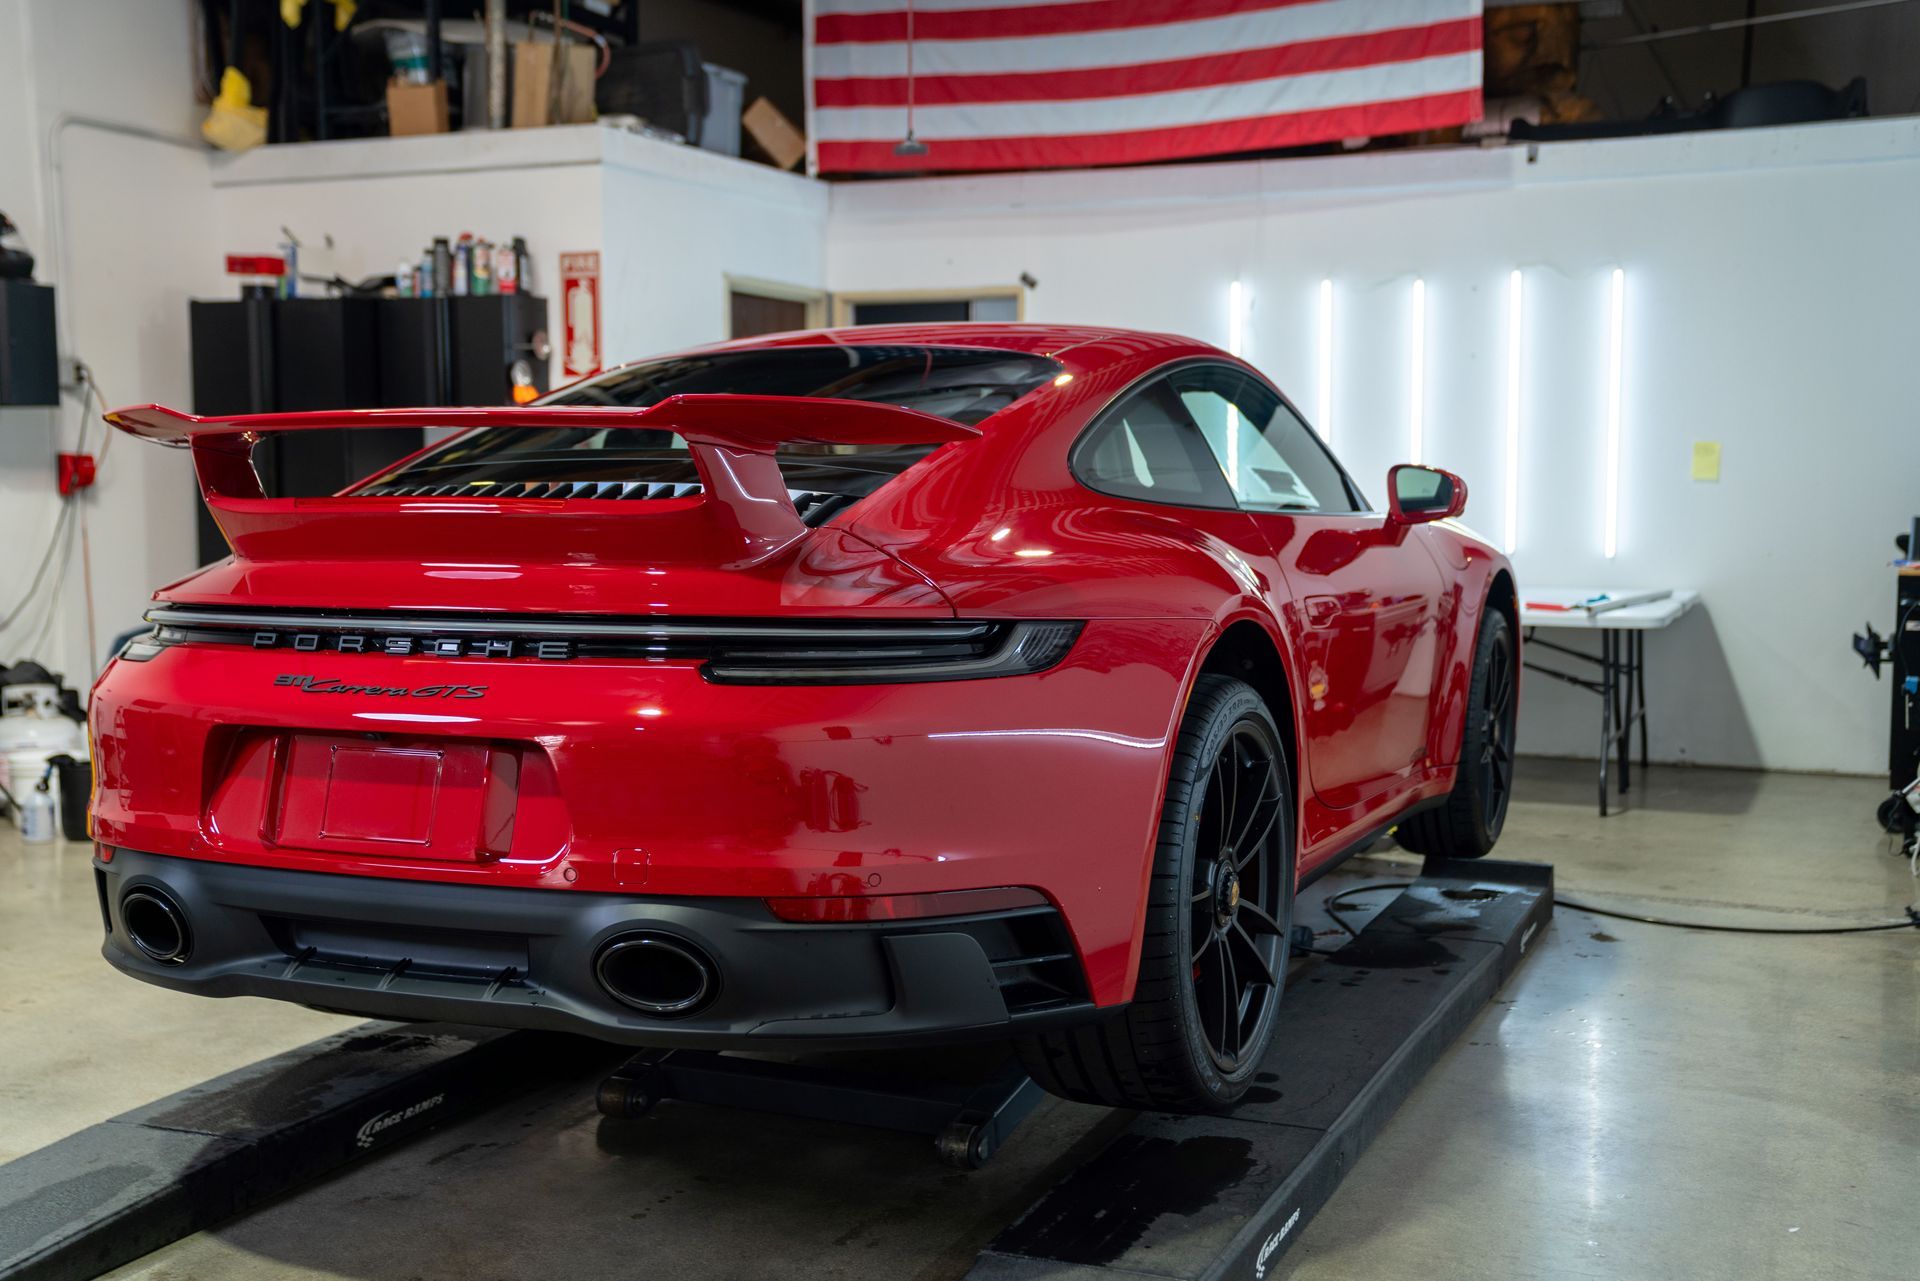 A red porsche 911 is parked on a lift in a garage .